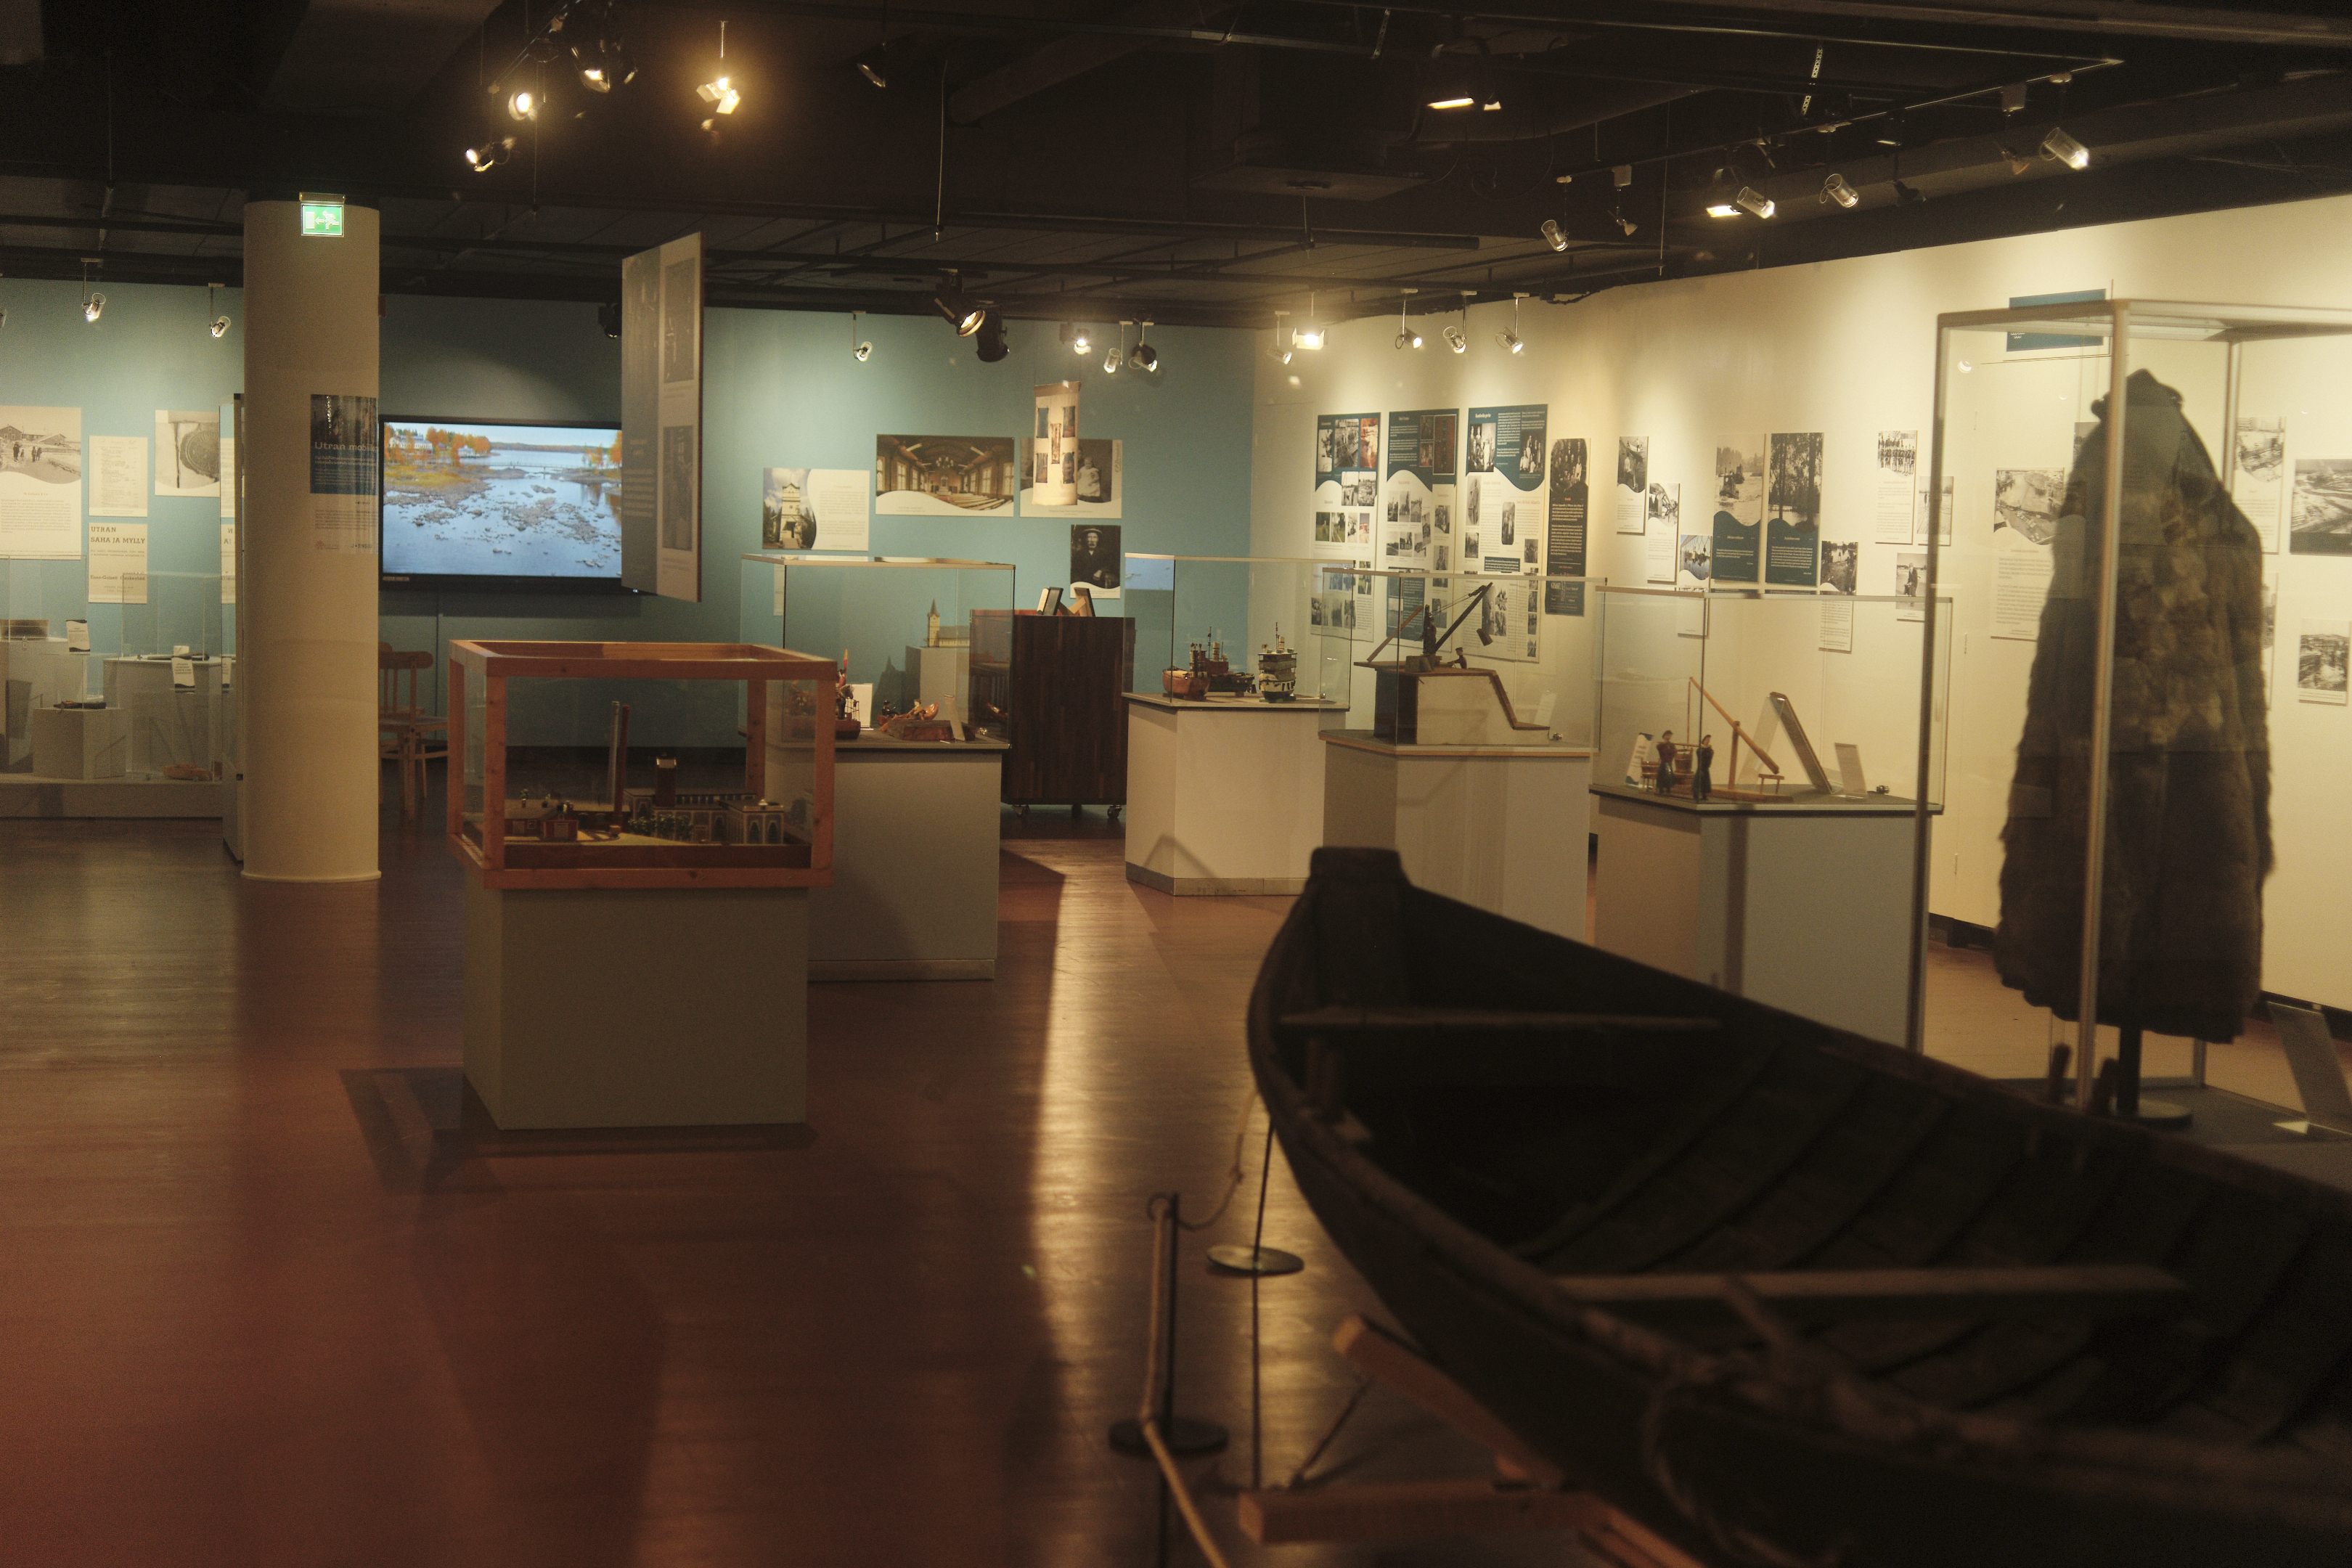 A new exhibition ”Stories from the River Pielisjoki” in North Karelian museum